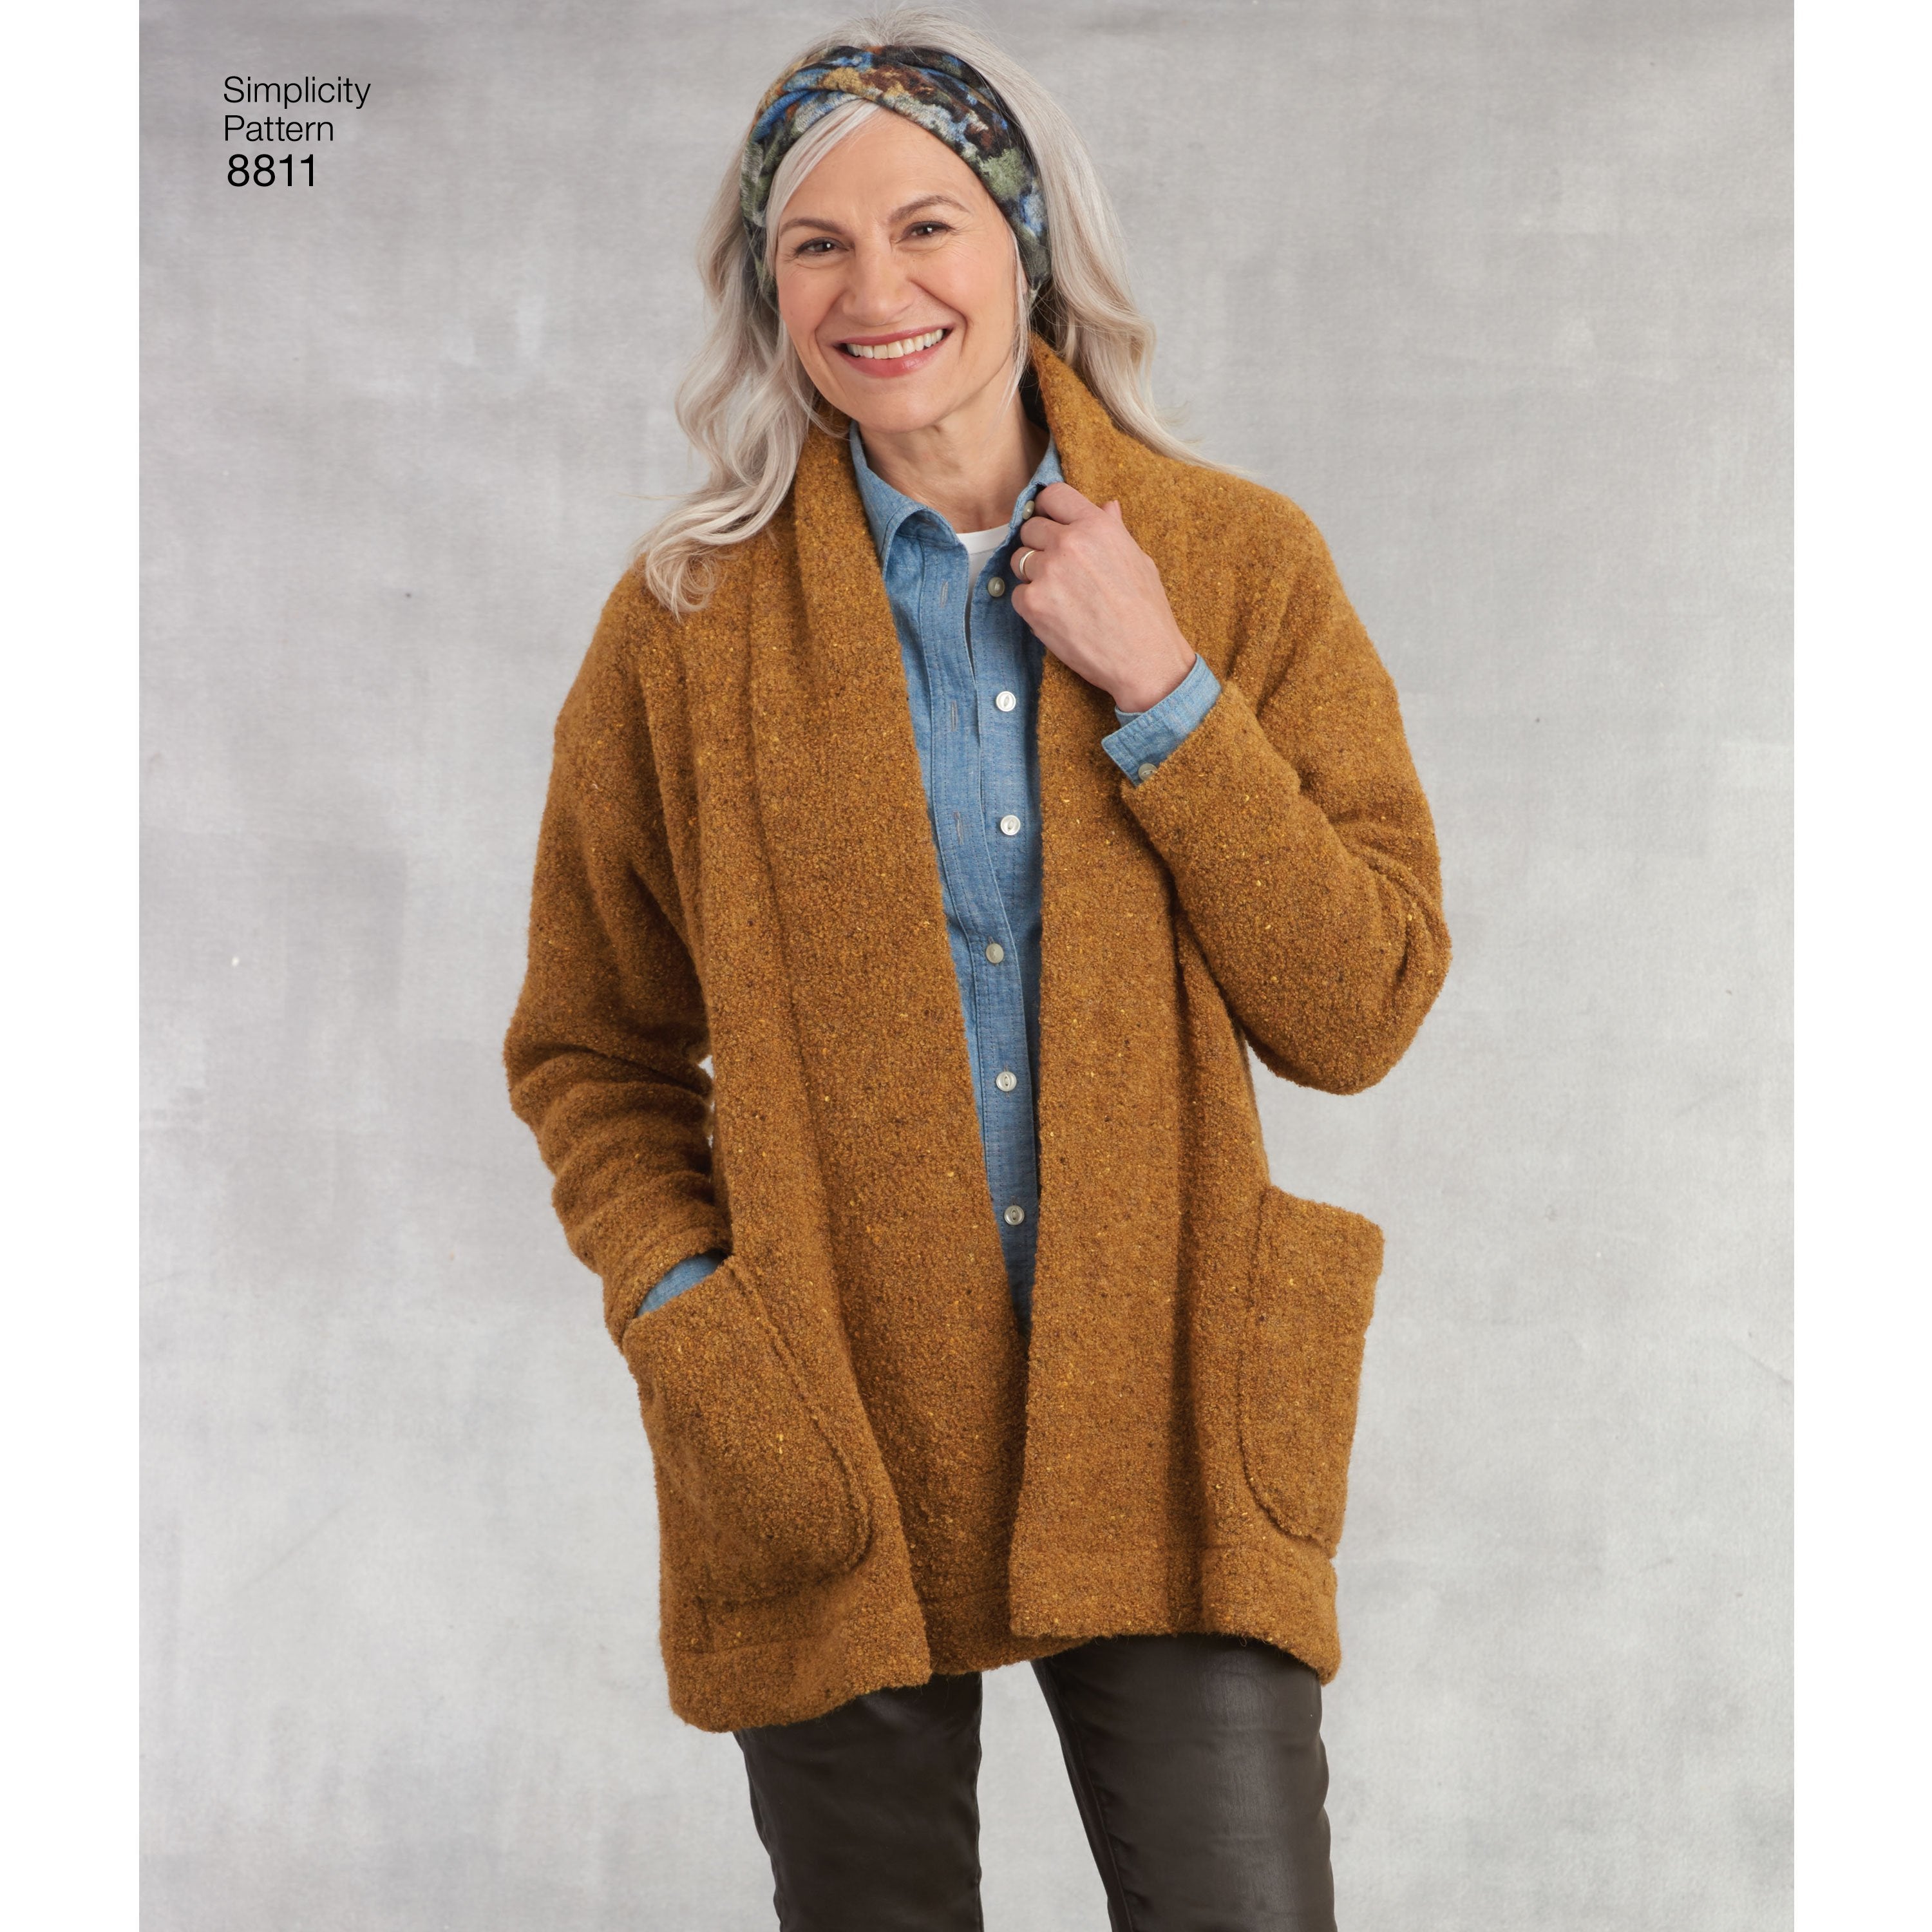 Simplicity Pattern 8811 Missesâ€™ Knit Sweater from Jaycotts Sewing Supplies